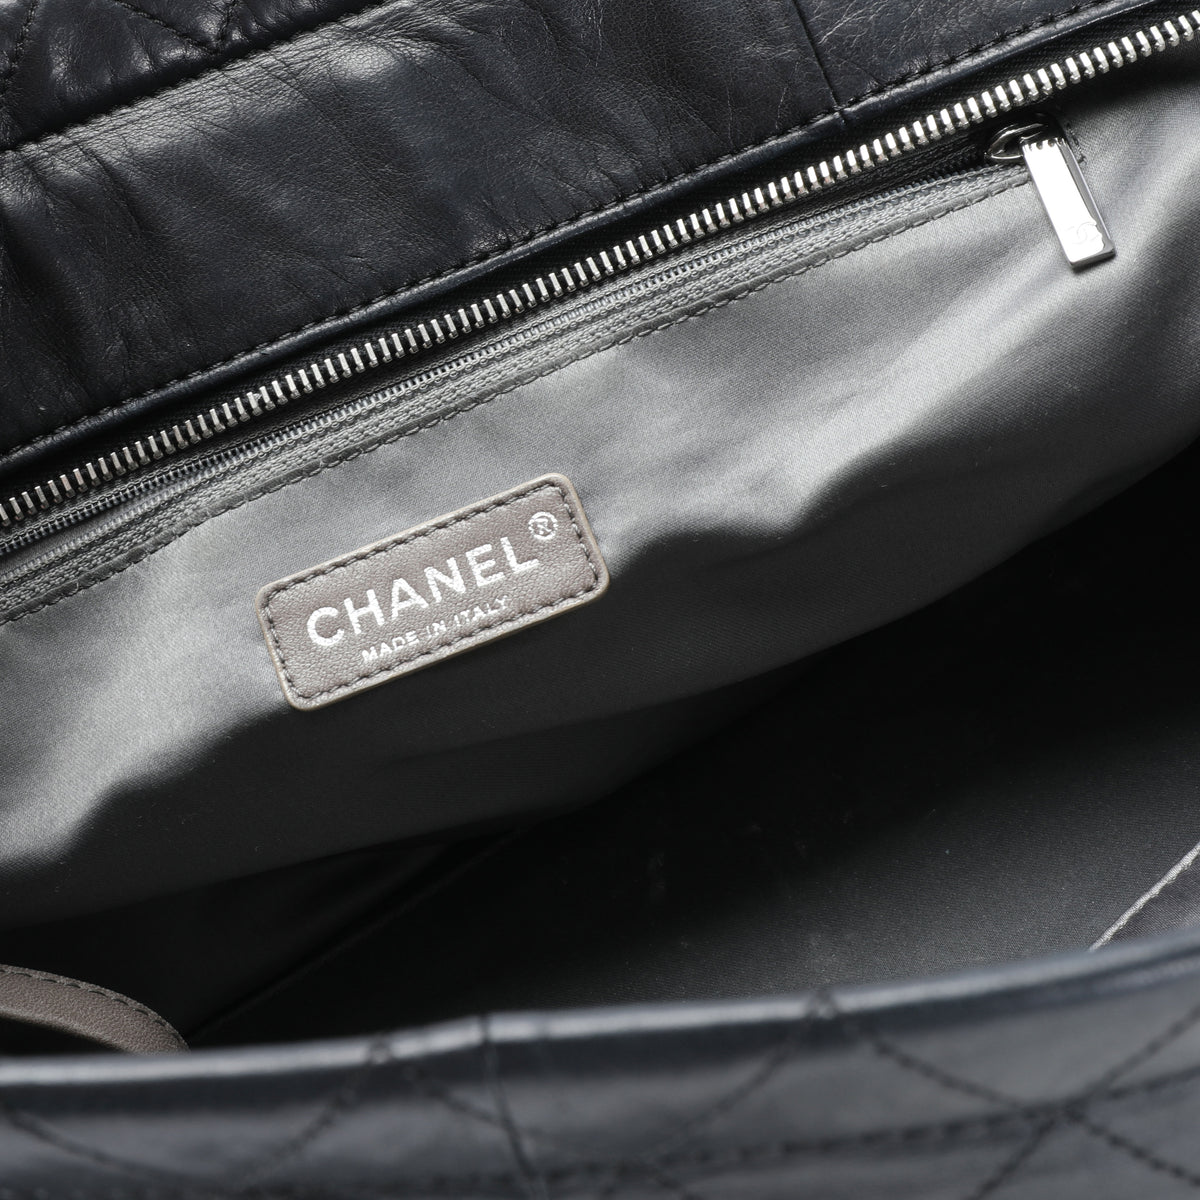 Chanel Black Quilted Lambskin Sharpei Medium East West Tote